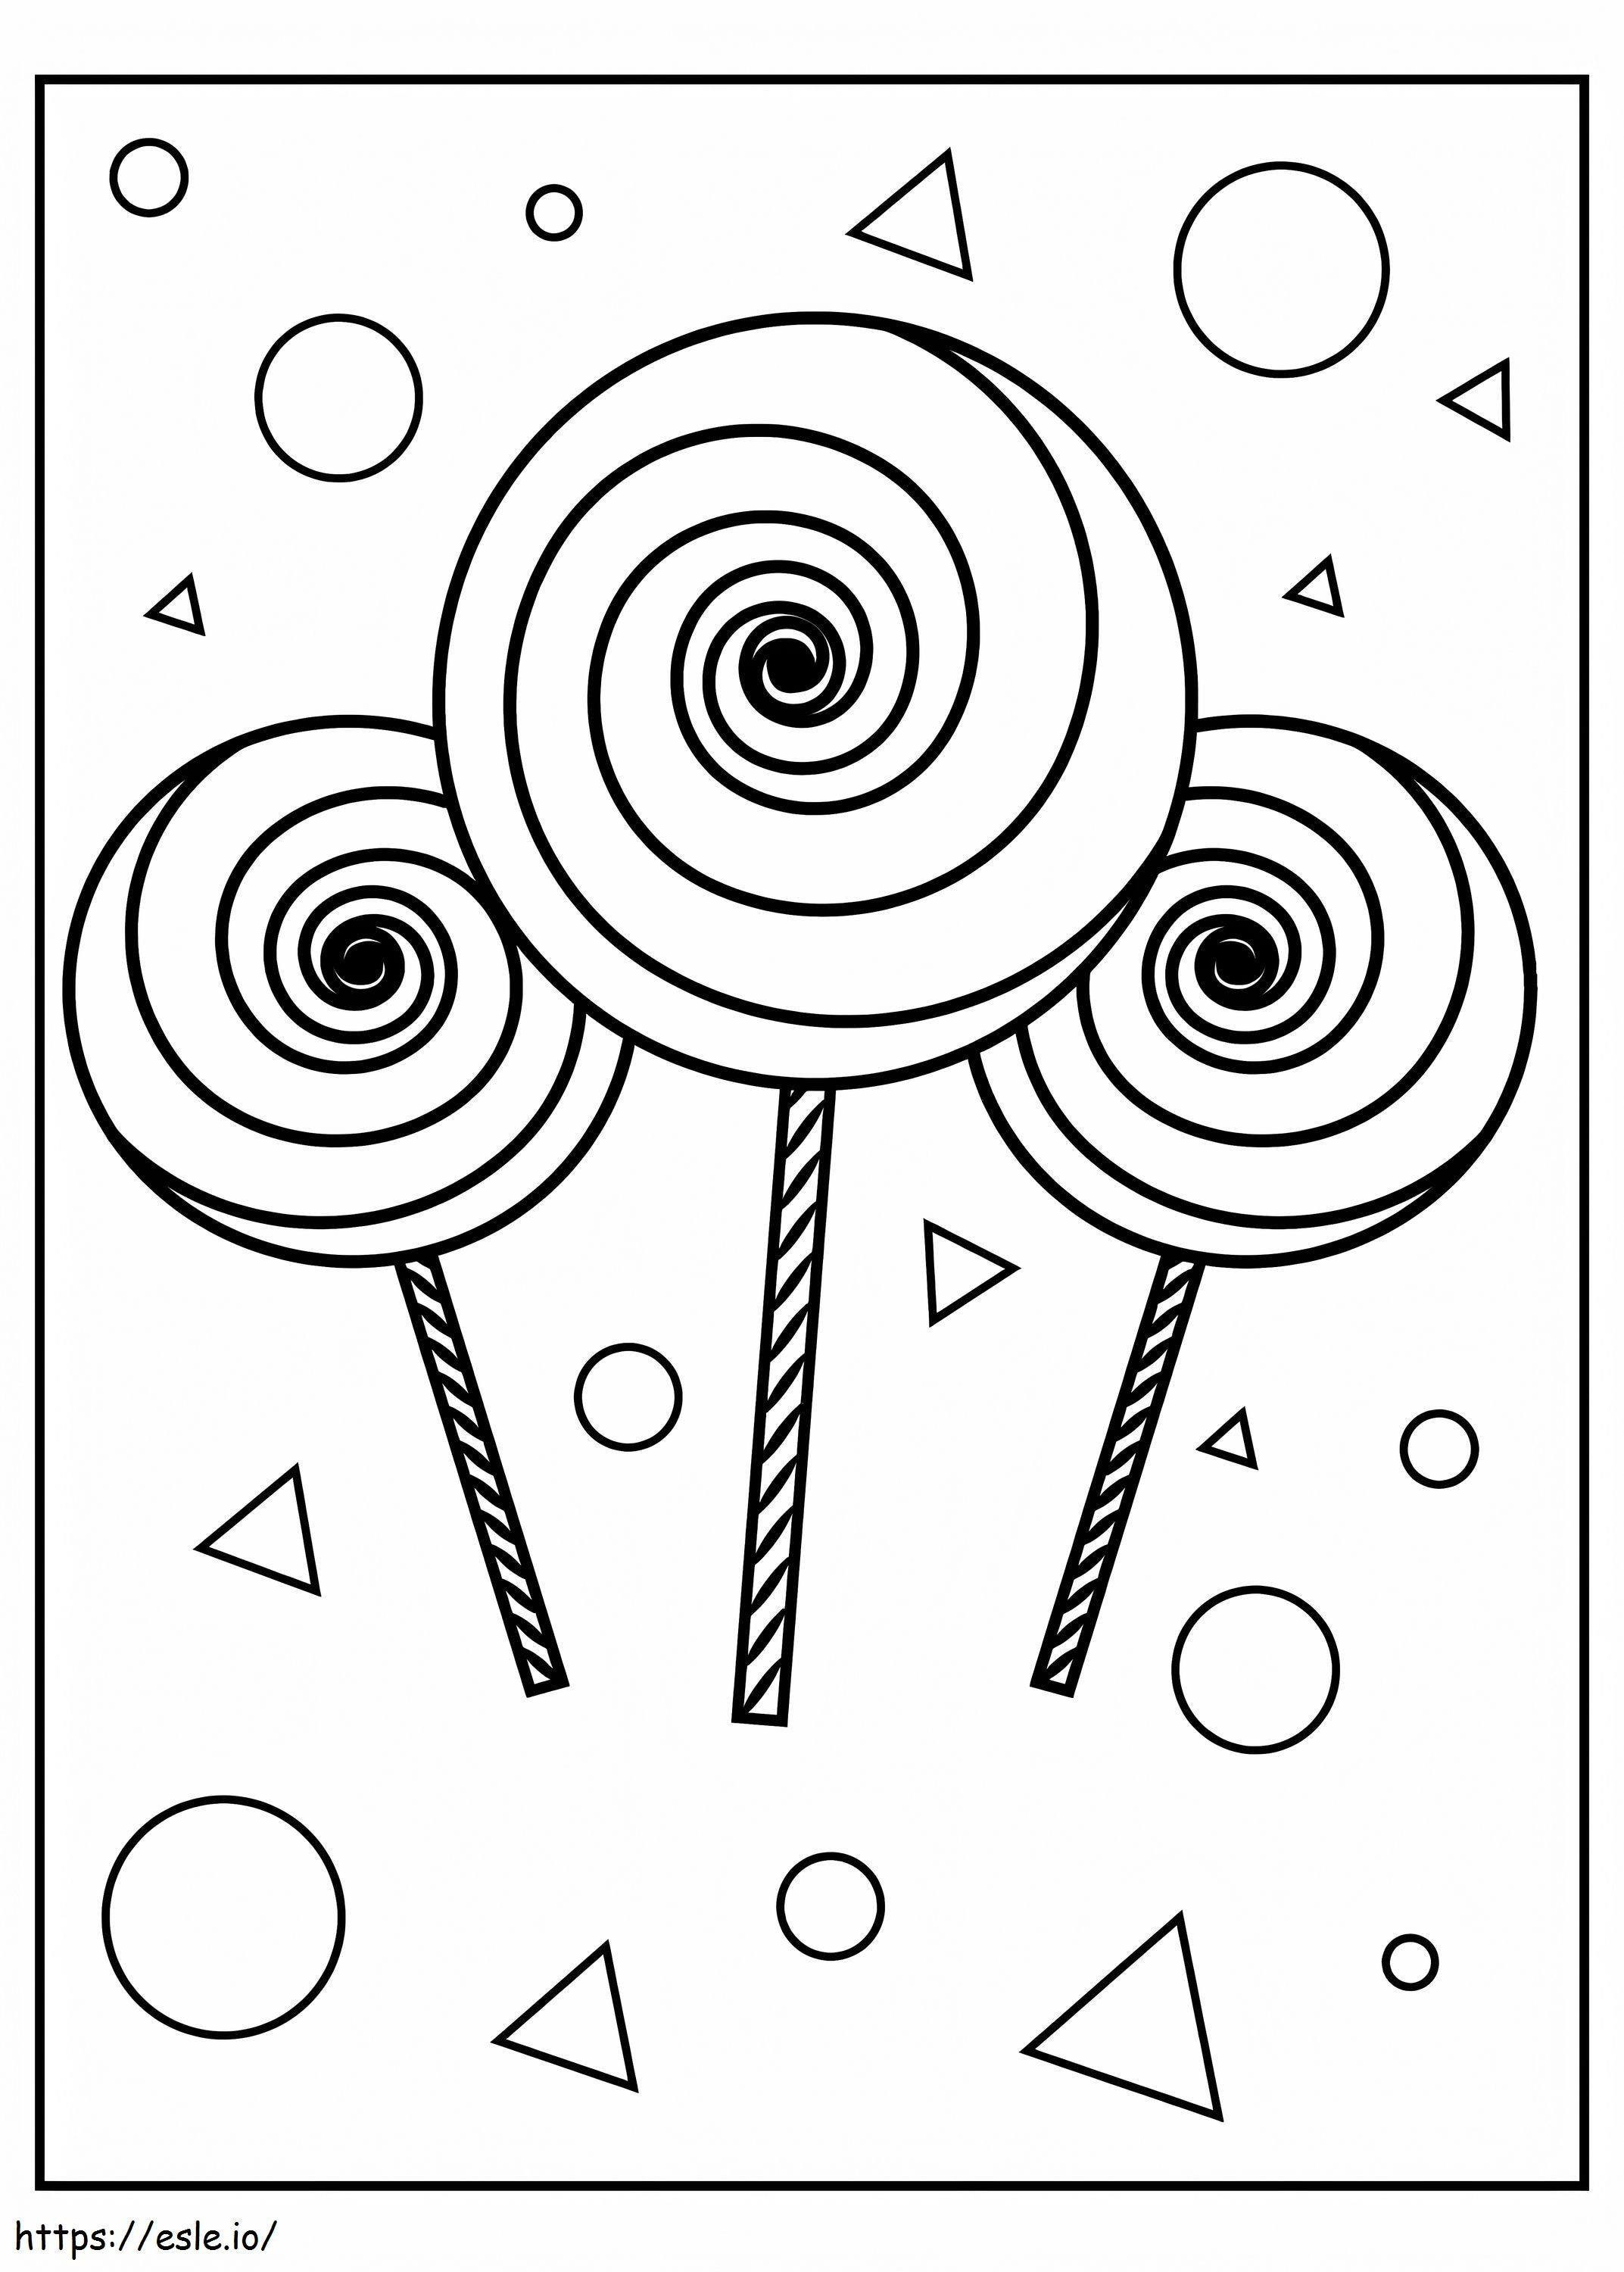 Three Sweets And Shapes coloring page